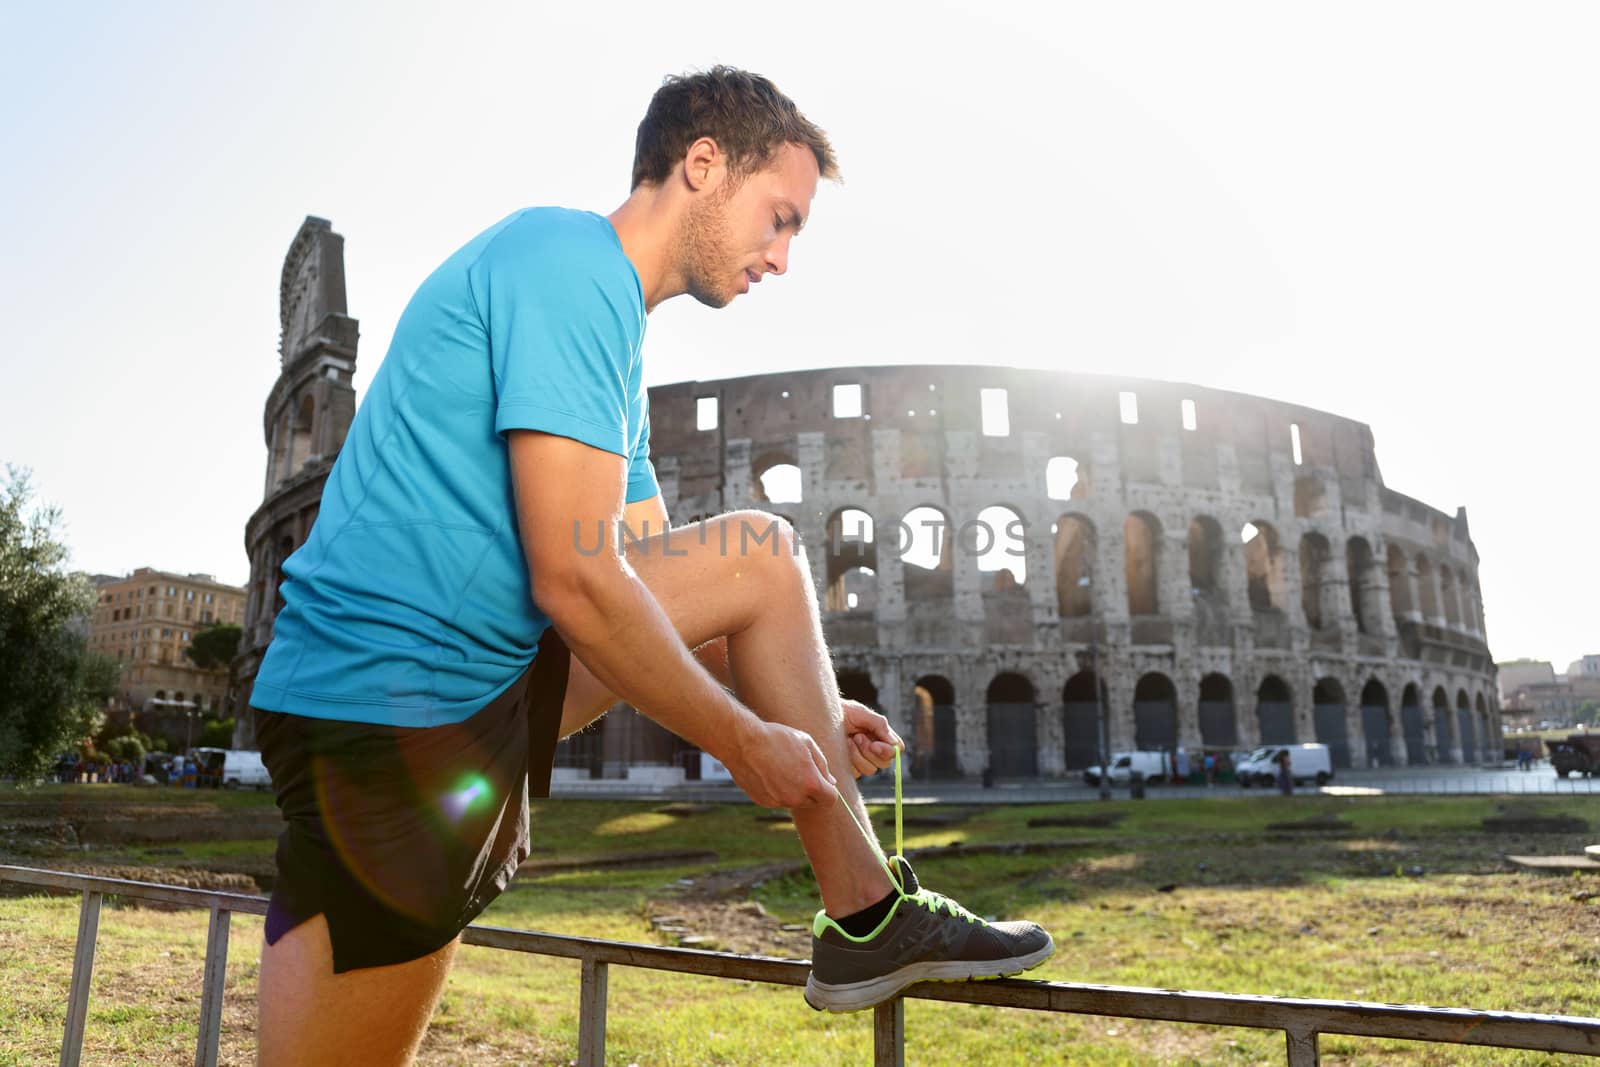 Jogger Running Tying Shoelaces by Colosseum by Maridav